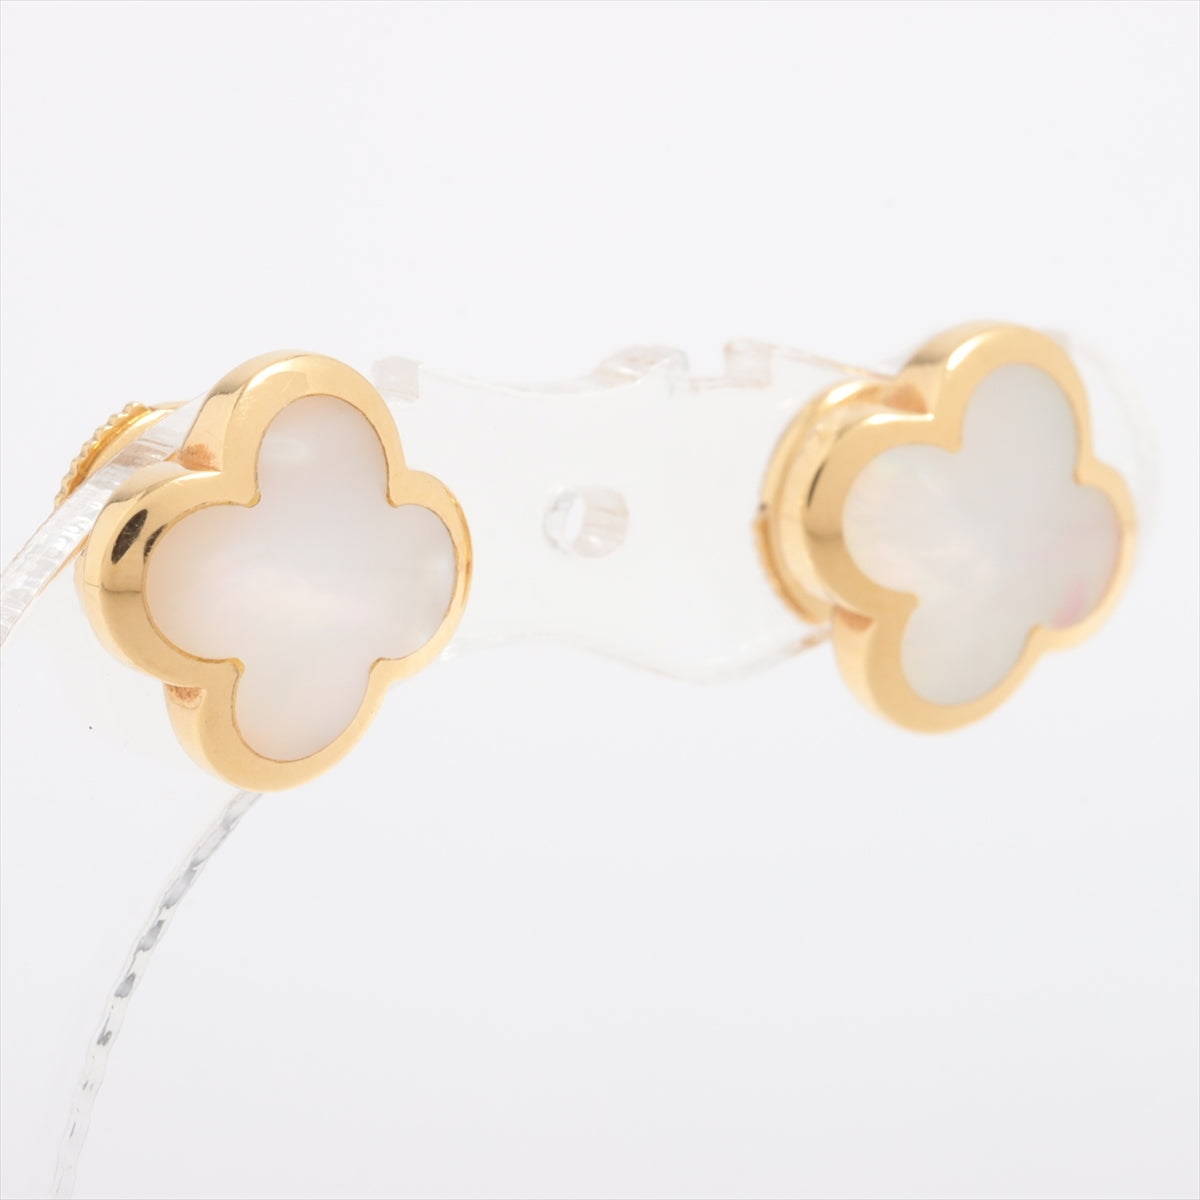 Van Cleef & Arpels Pure Alhambra shells Piercing jewelry 750(YG) 3.8g Small scratches on shell surface